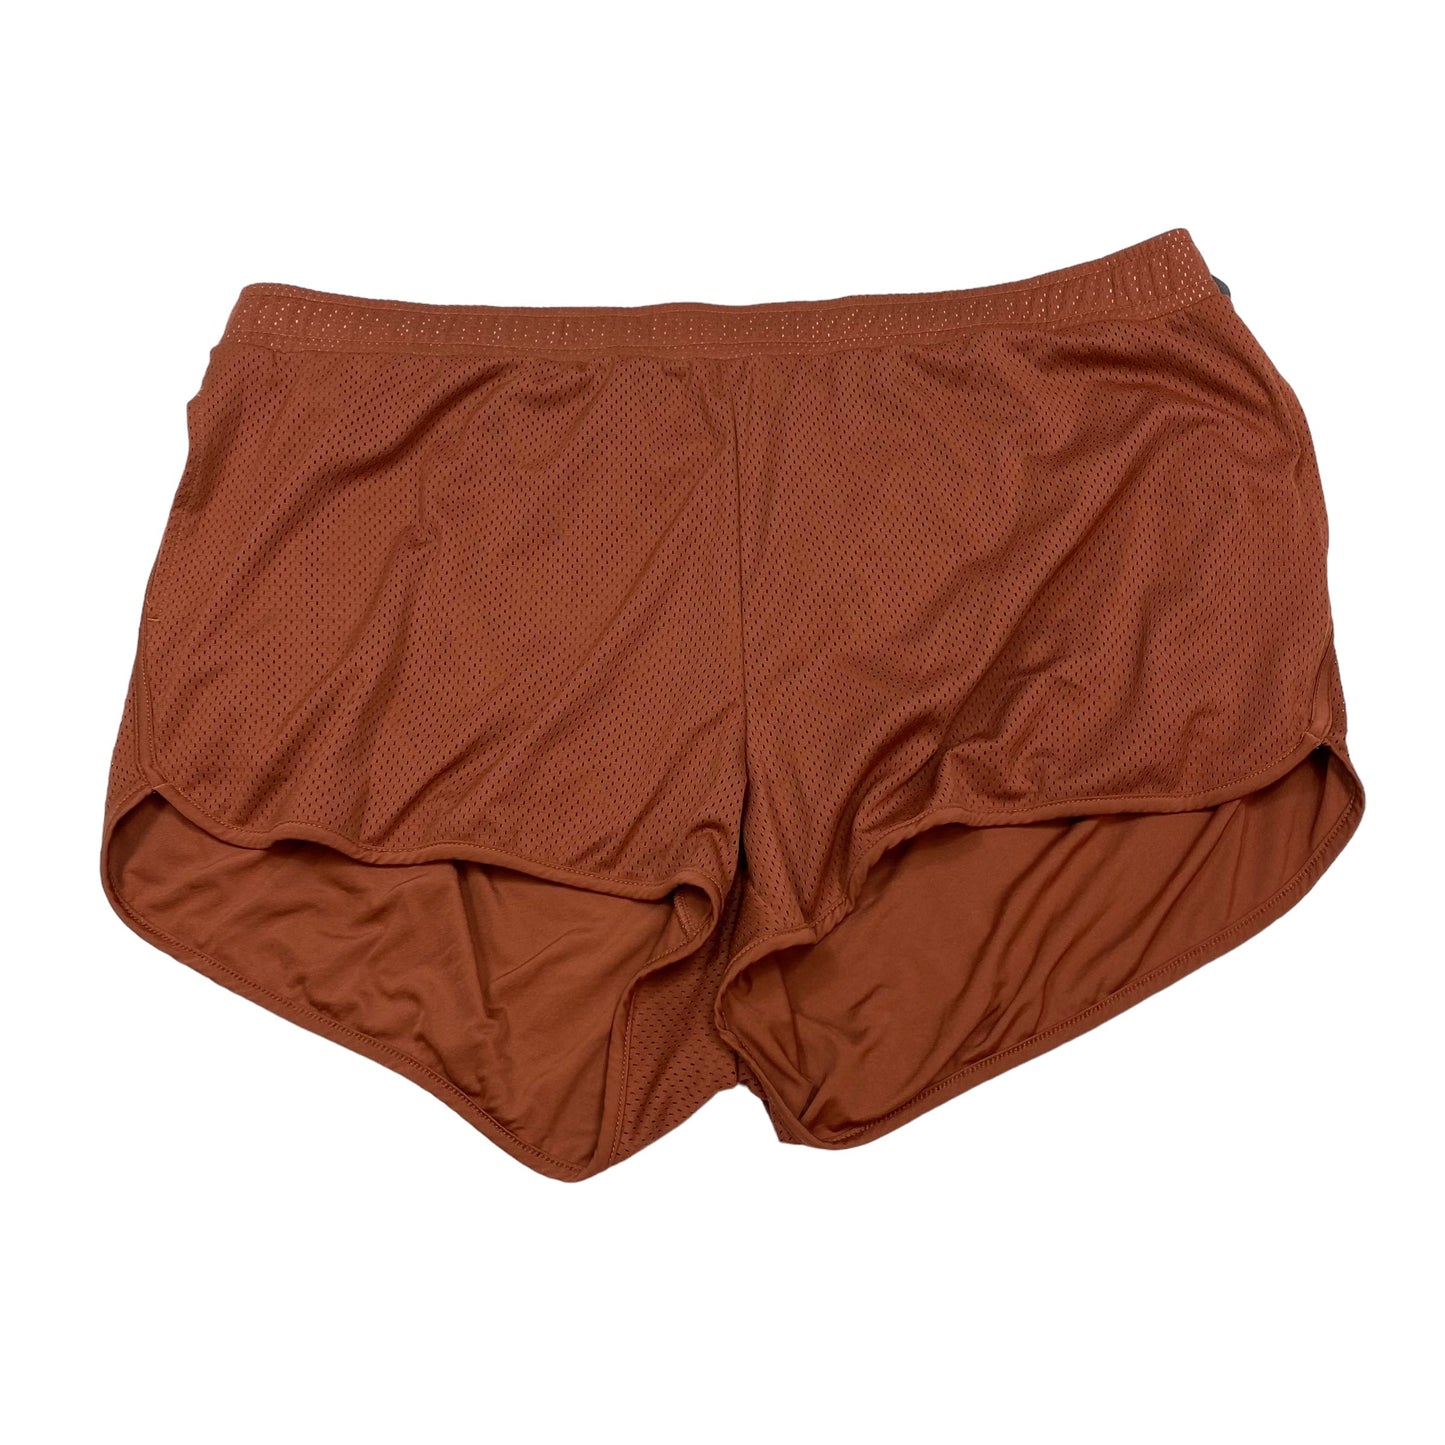 Brown Athletic Shorts Old Navy, Size 3x